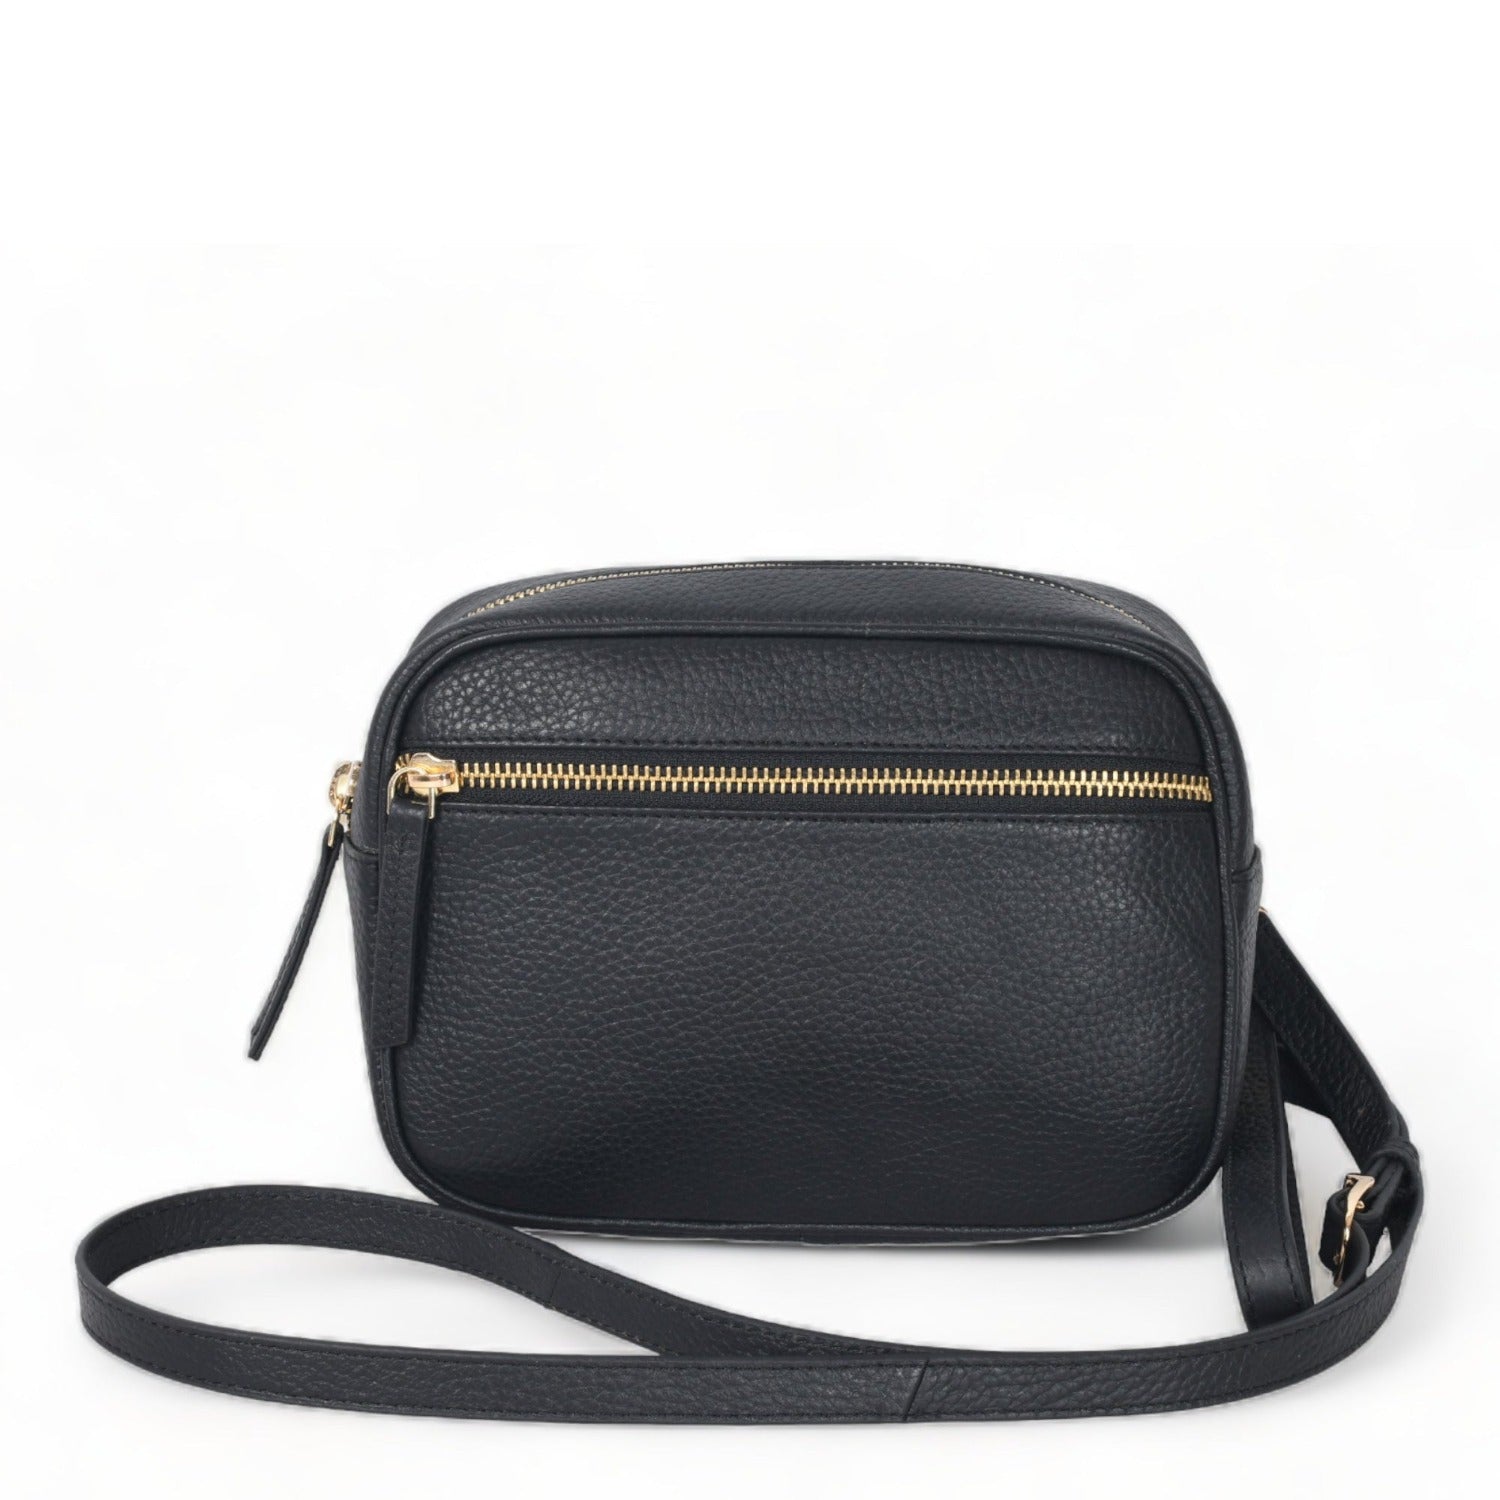 Black Convertible Leather Cross Body Camera Bag Brix annd Bailey Ethical Bag Brand